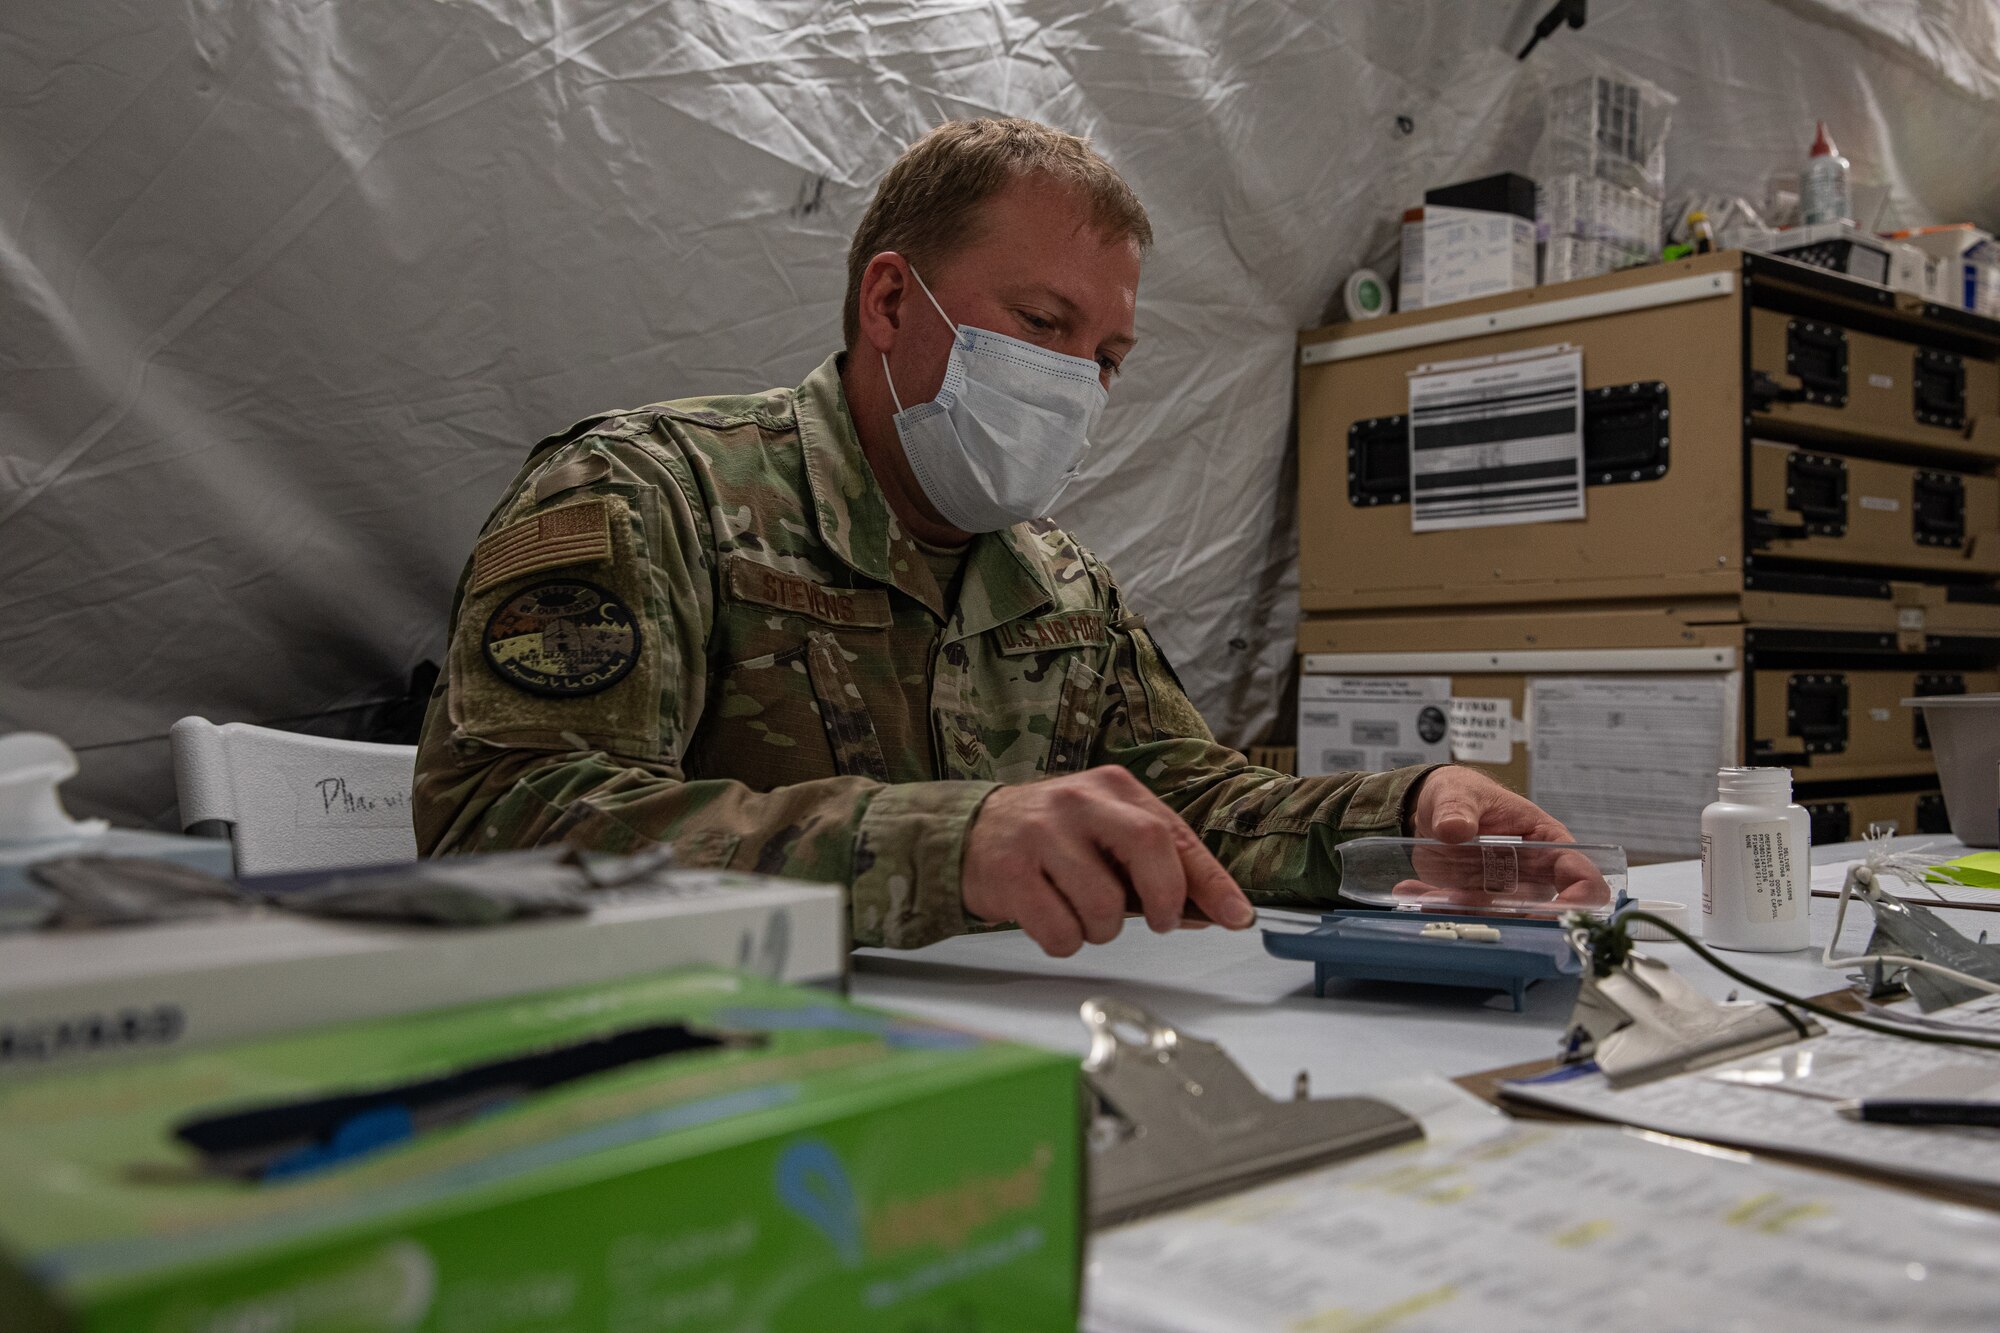 U.S. Air Force Staff Sgt. Dustin Stevens, Task Force Holloman pharmacy lead, counts medication prescribed to Afghan evacuees on Holloman Air Force Base, New Mexico, Oct. 14, 2021. The Department of Defense, through U.S. Northern Command, and in support of the Department of Homeland Security, is providing transportation, temporary housing, medical screening, and general support for at least 50,000 Afghan evacuees at suitable facilities, in permanent or temporary structures, as quickly as possible. This initiative provides Afghan personnel essential support at secure locations outside Afghanistan. (U.S. Army photo by Pfc. Anthony Sanchez)